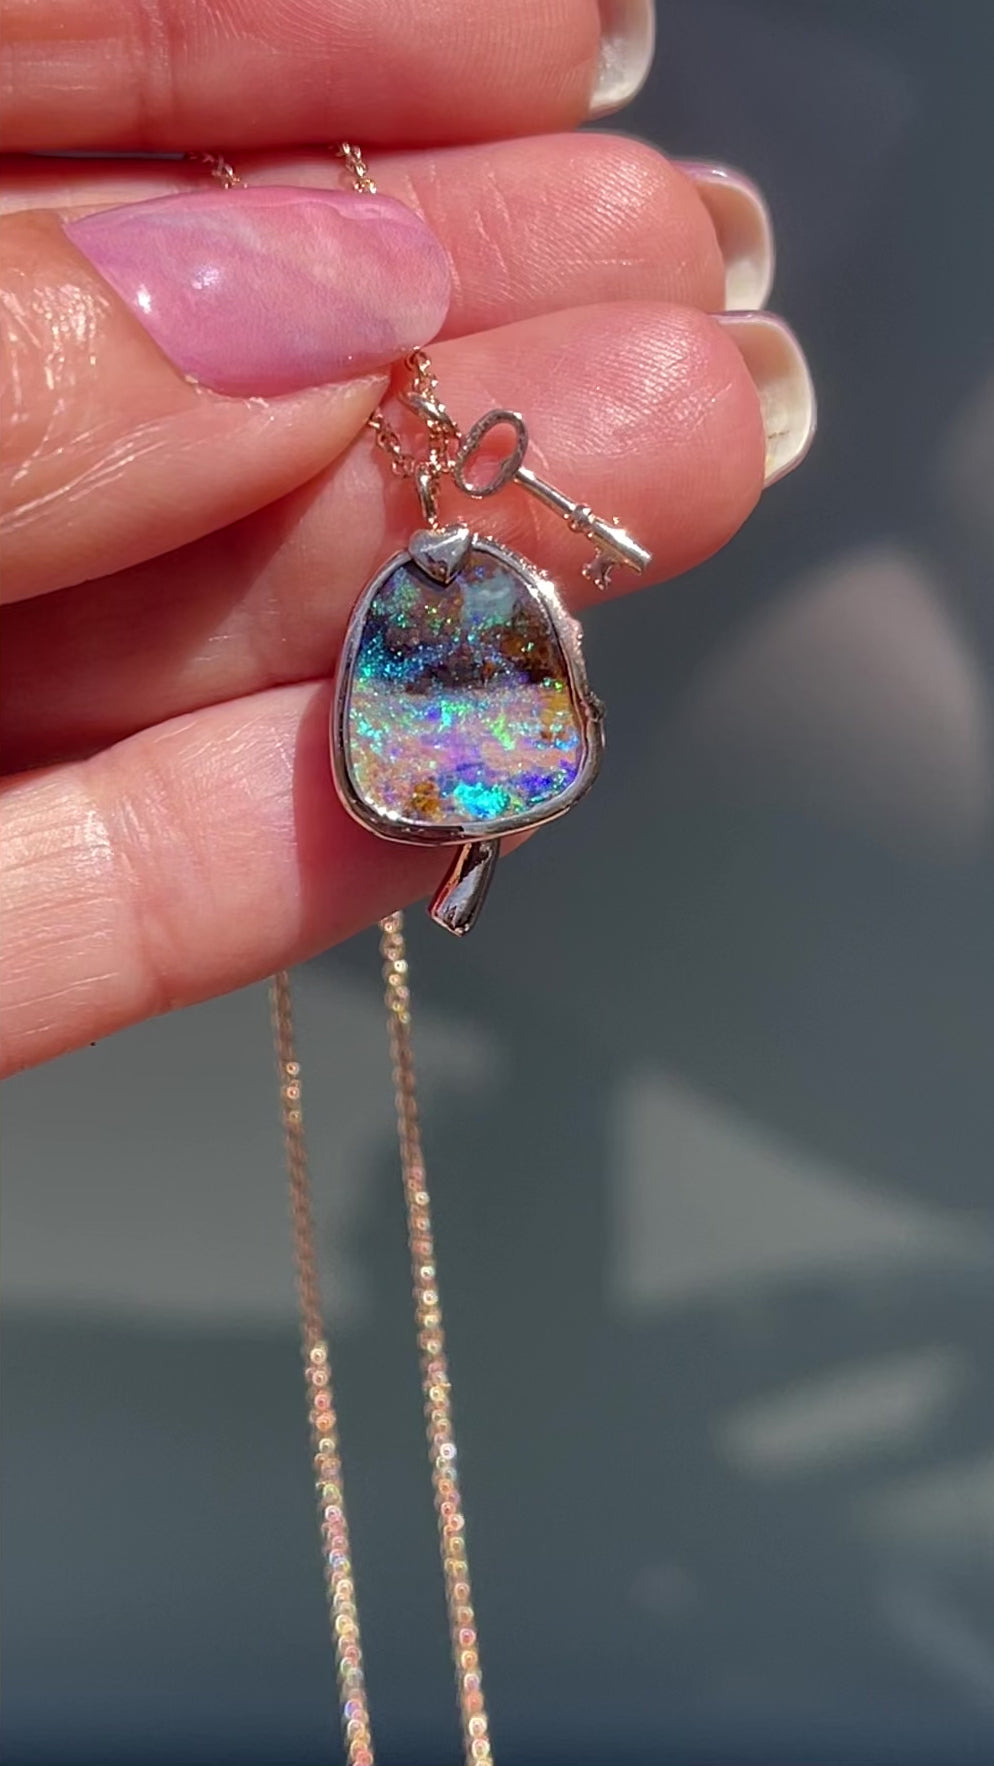 Video of an Australian Opal Necklace by NIXIN Jewelry with a sliding key charm and hidden emeralds.